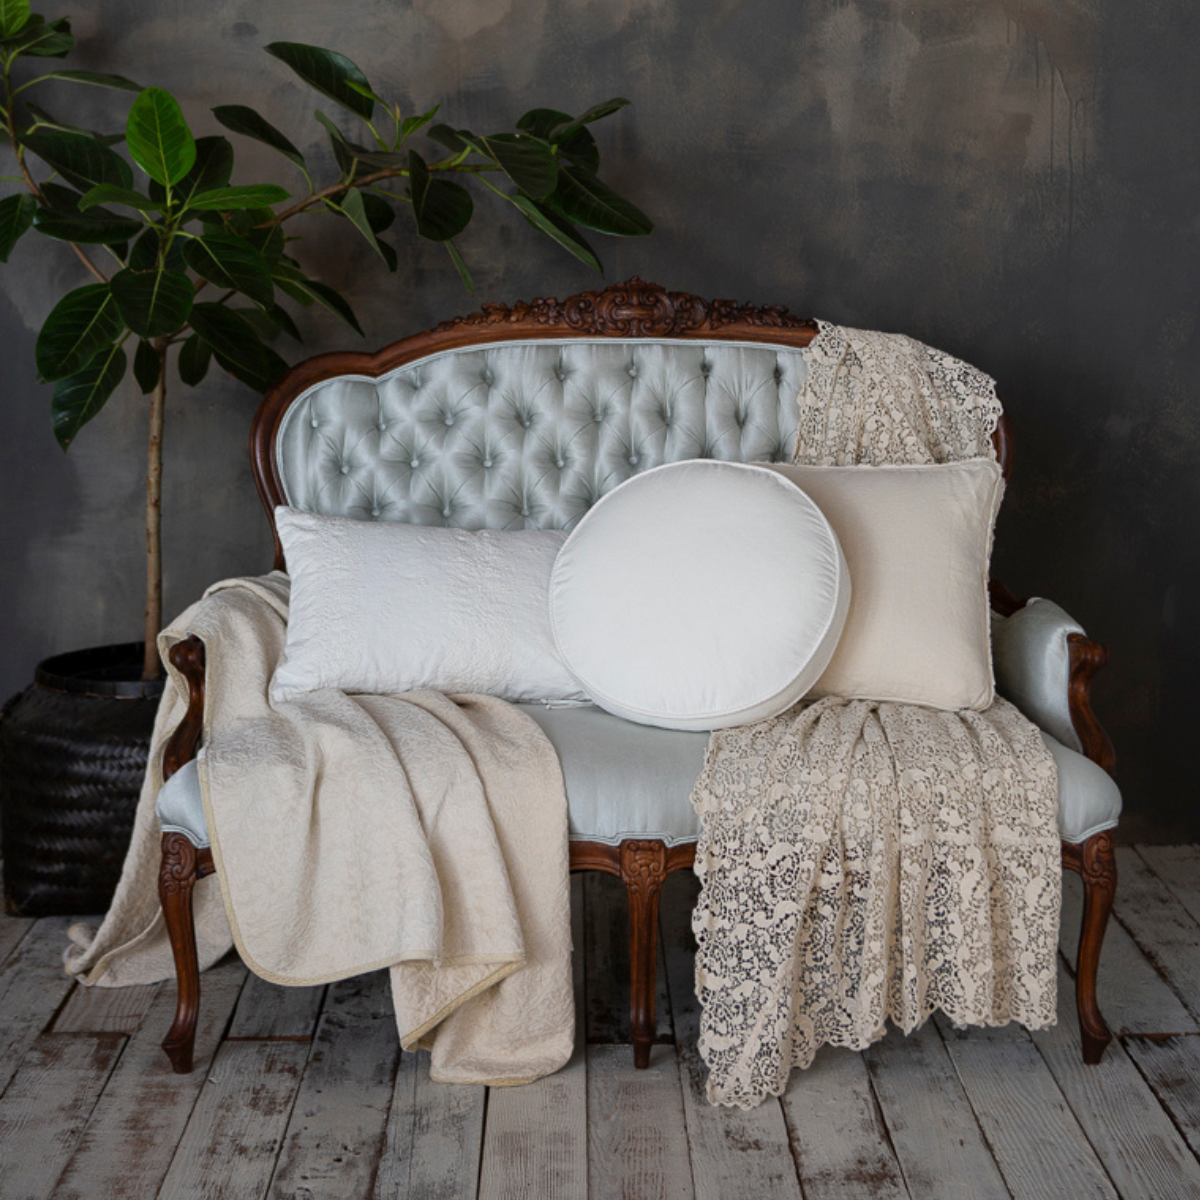 An antique sofa dressed in neutral-toned throw pillows and blankets.